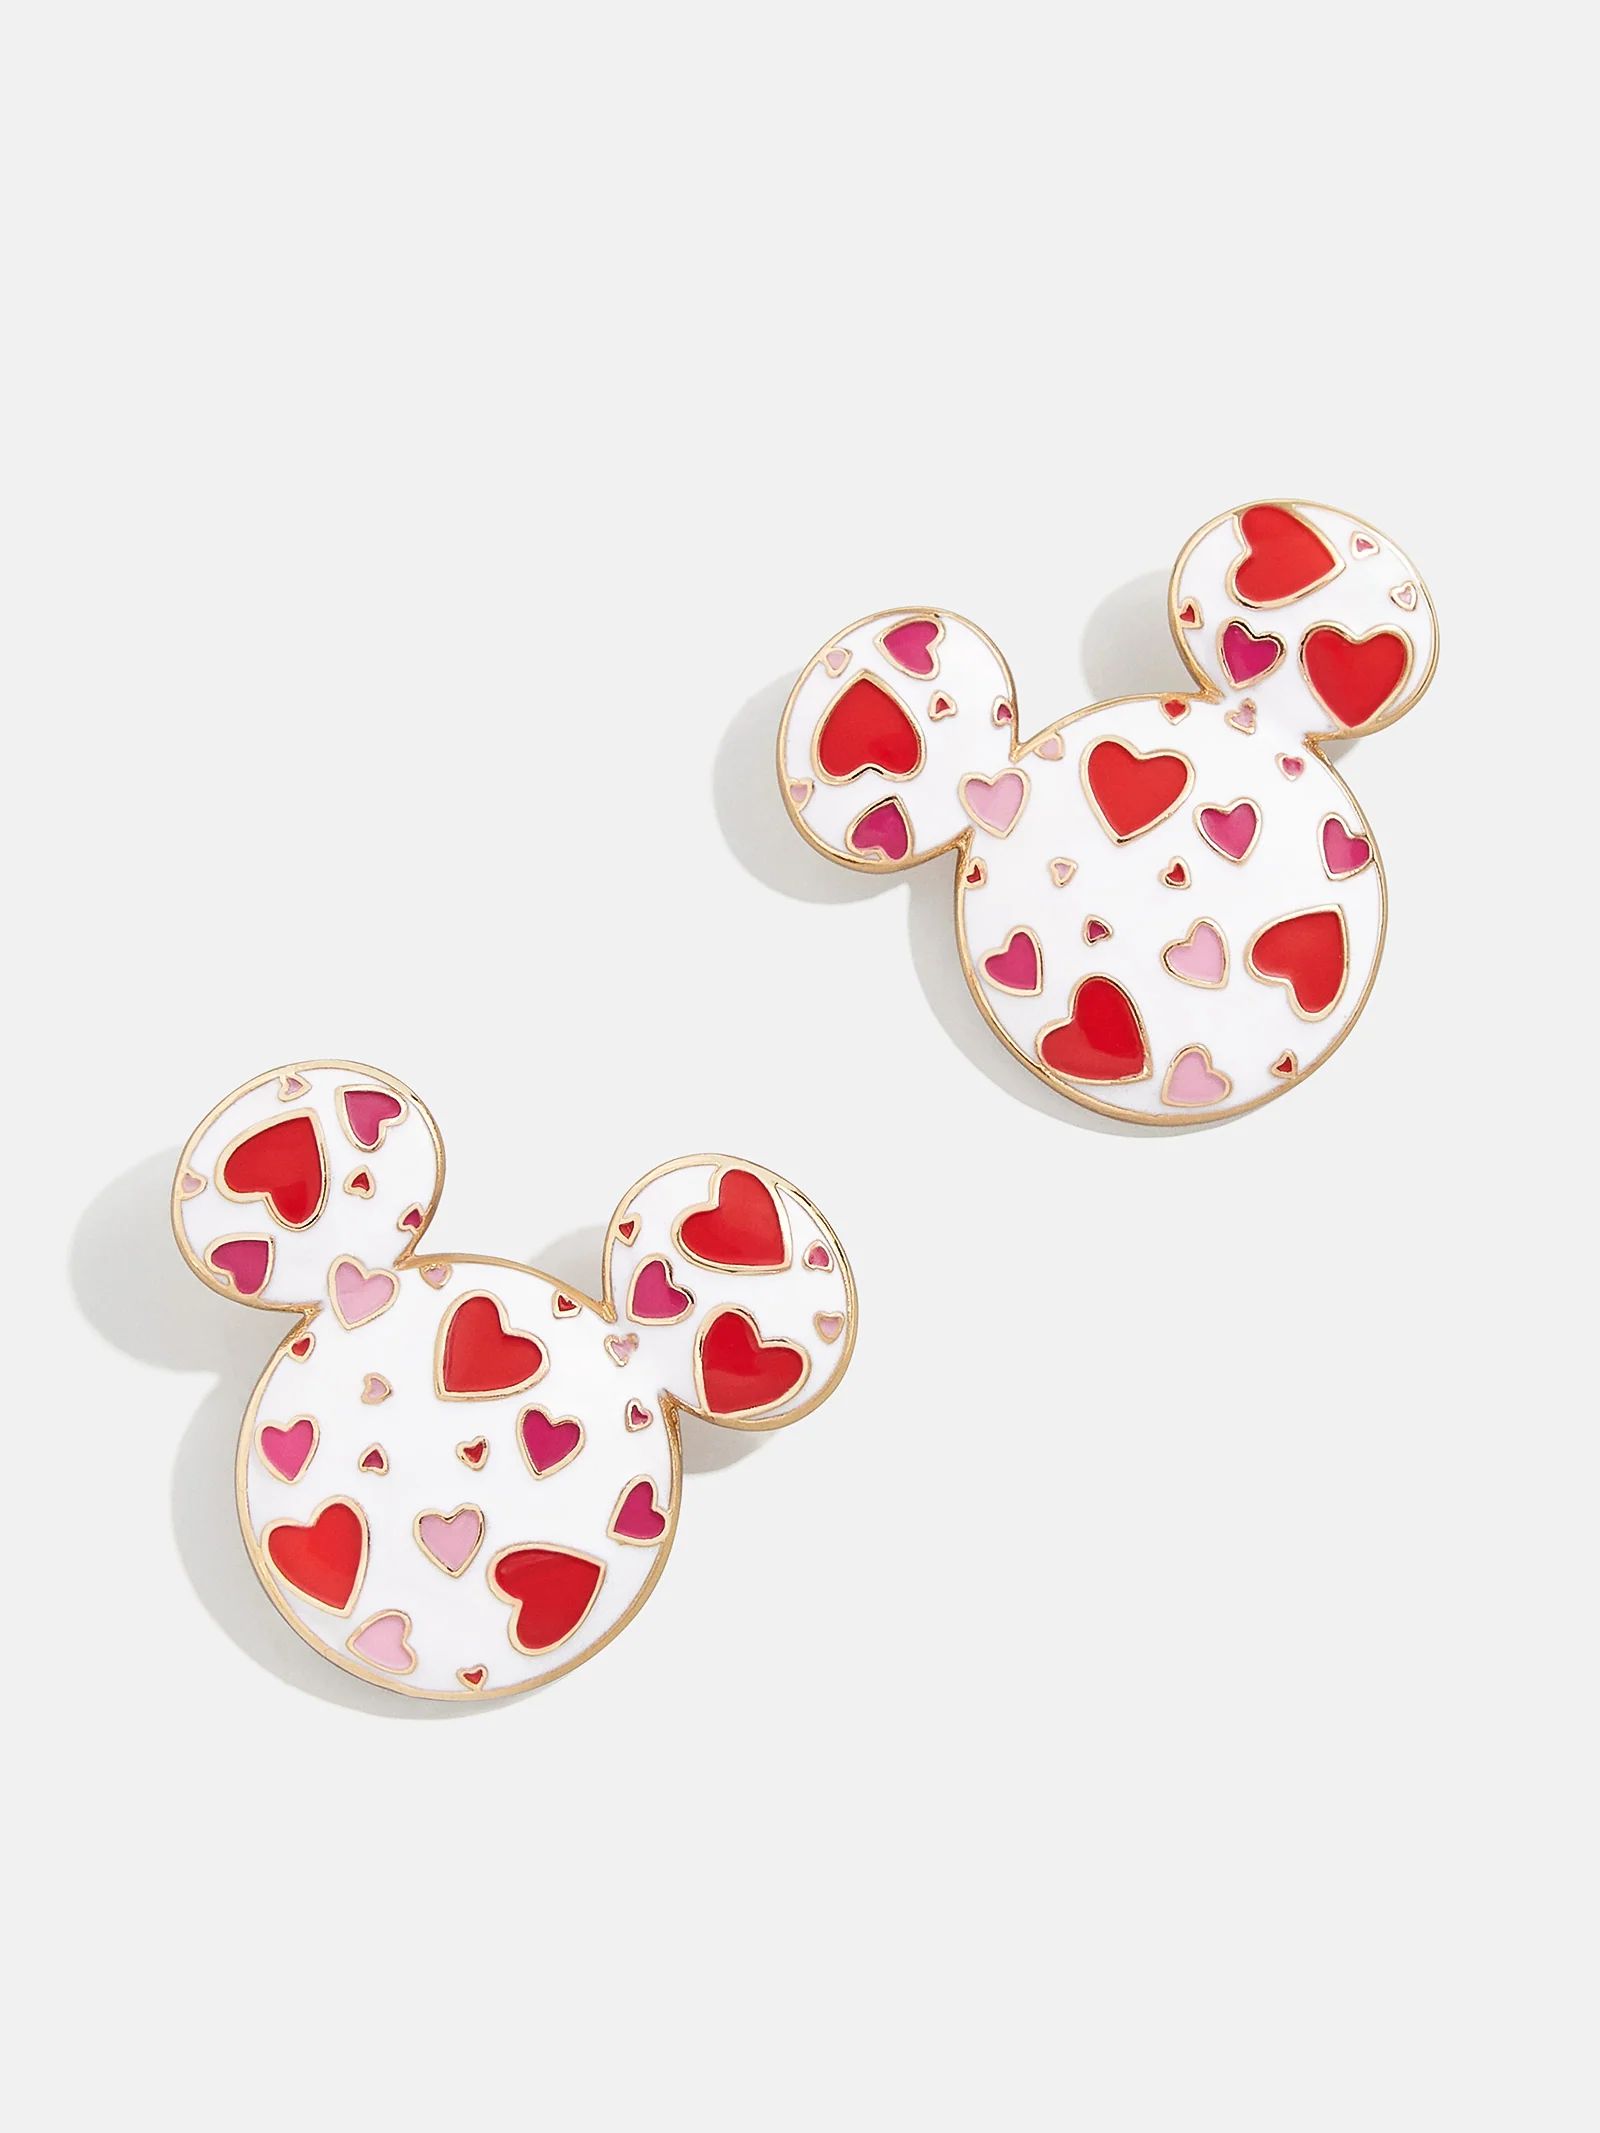 Mickey Mouse Disney Repeating Hearts Earrings - Red/White | BaubleBar (US)